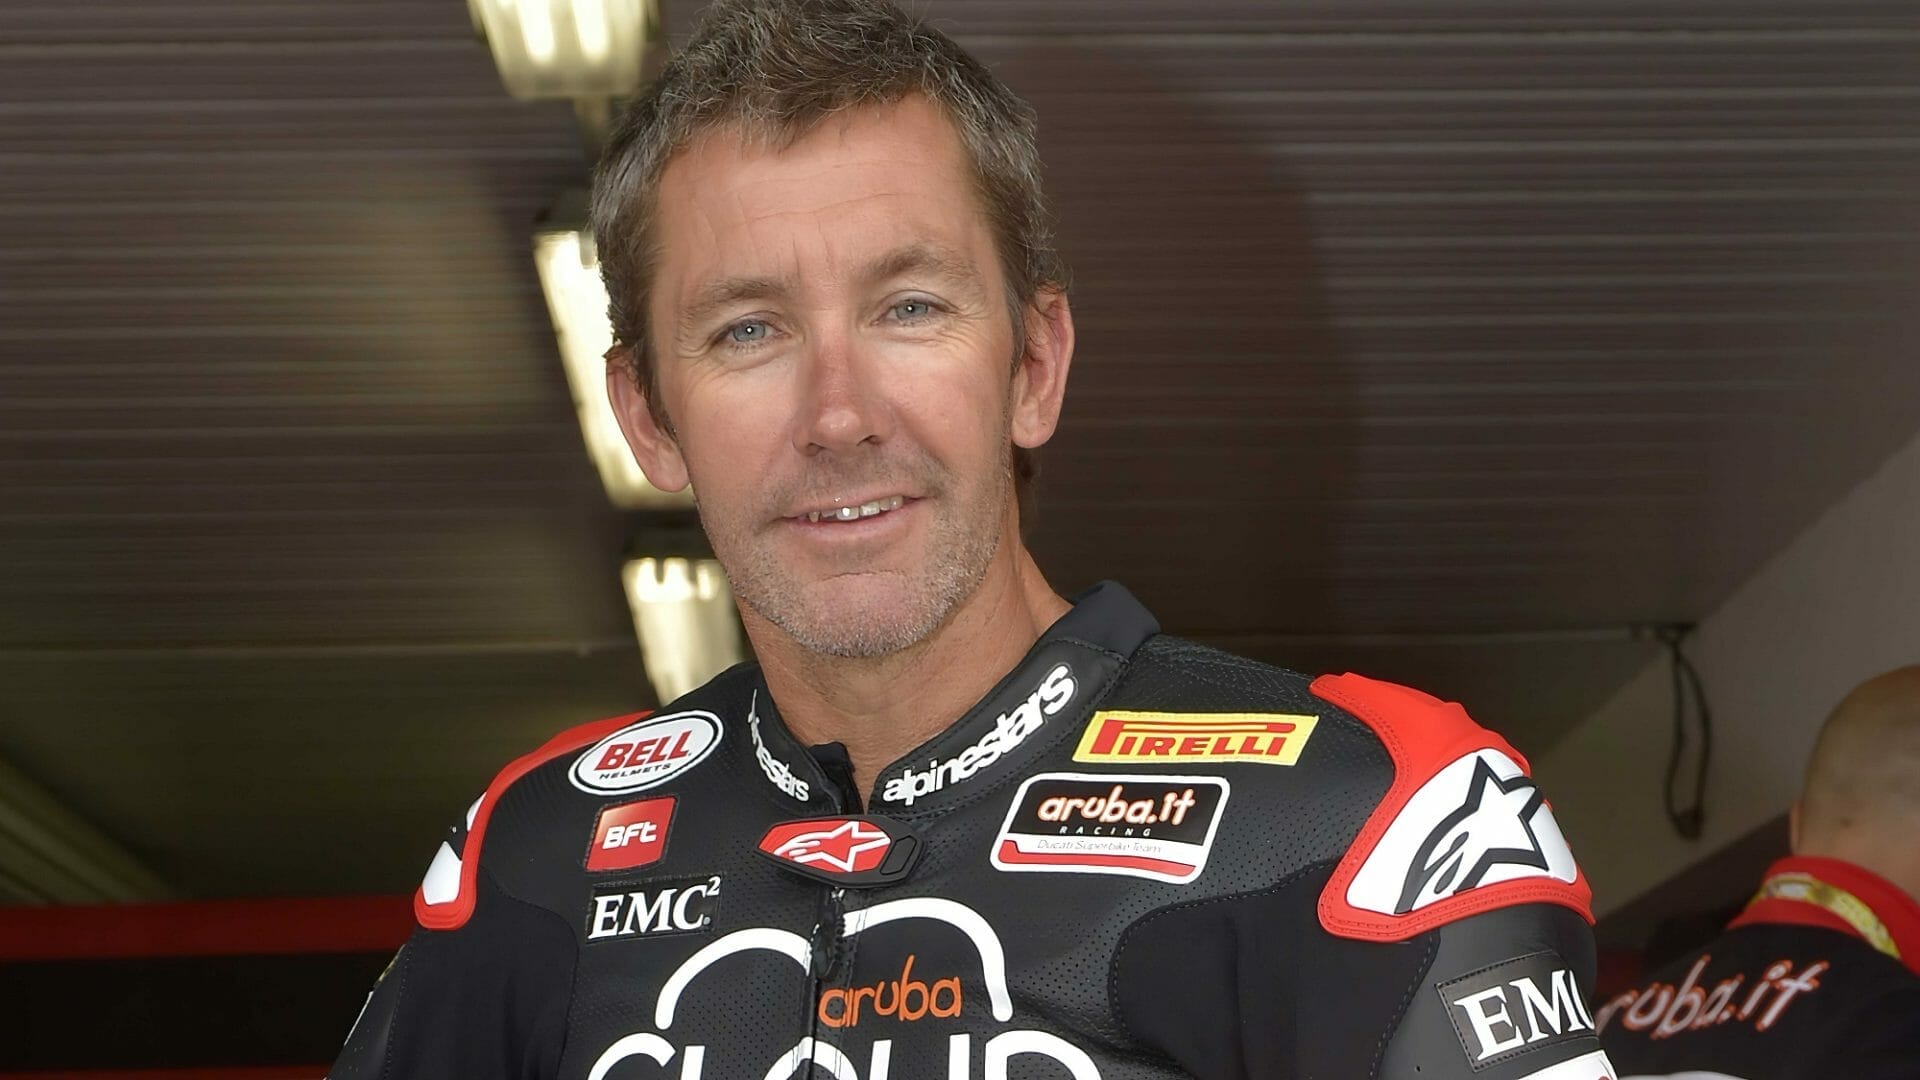 Troy Bayliss breaks vertebrae in bike accident
- also in the MOTORCYCLES.NEWS APP